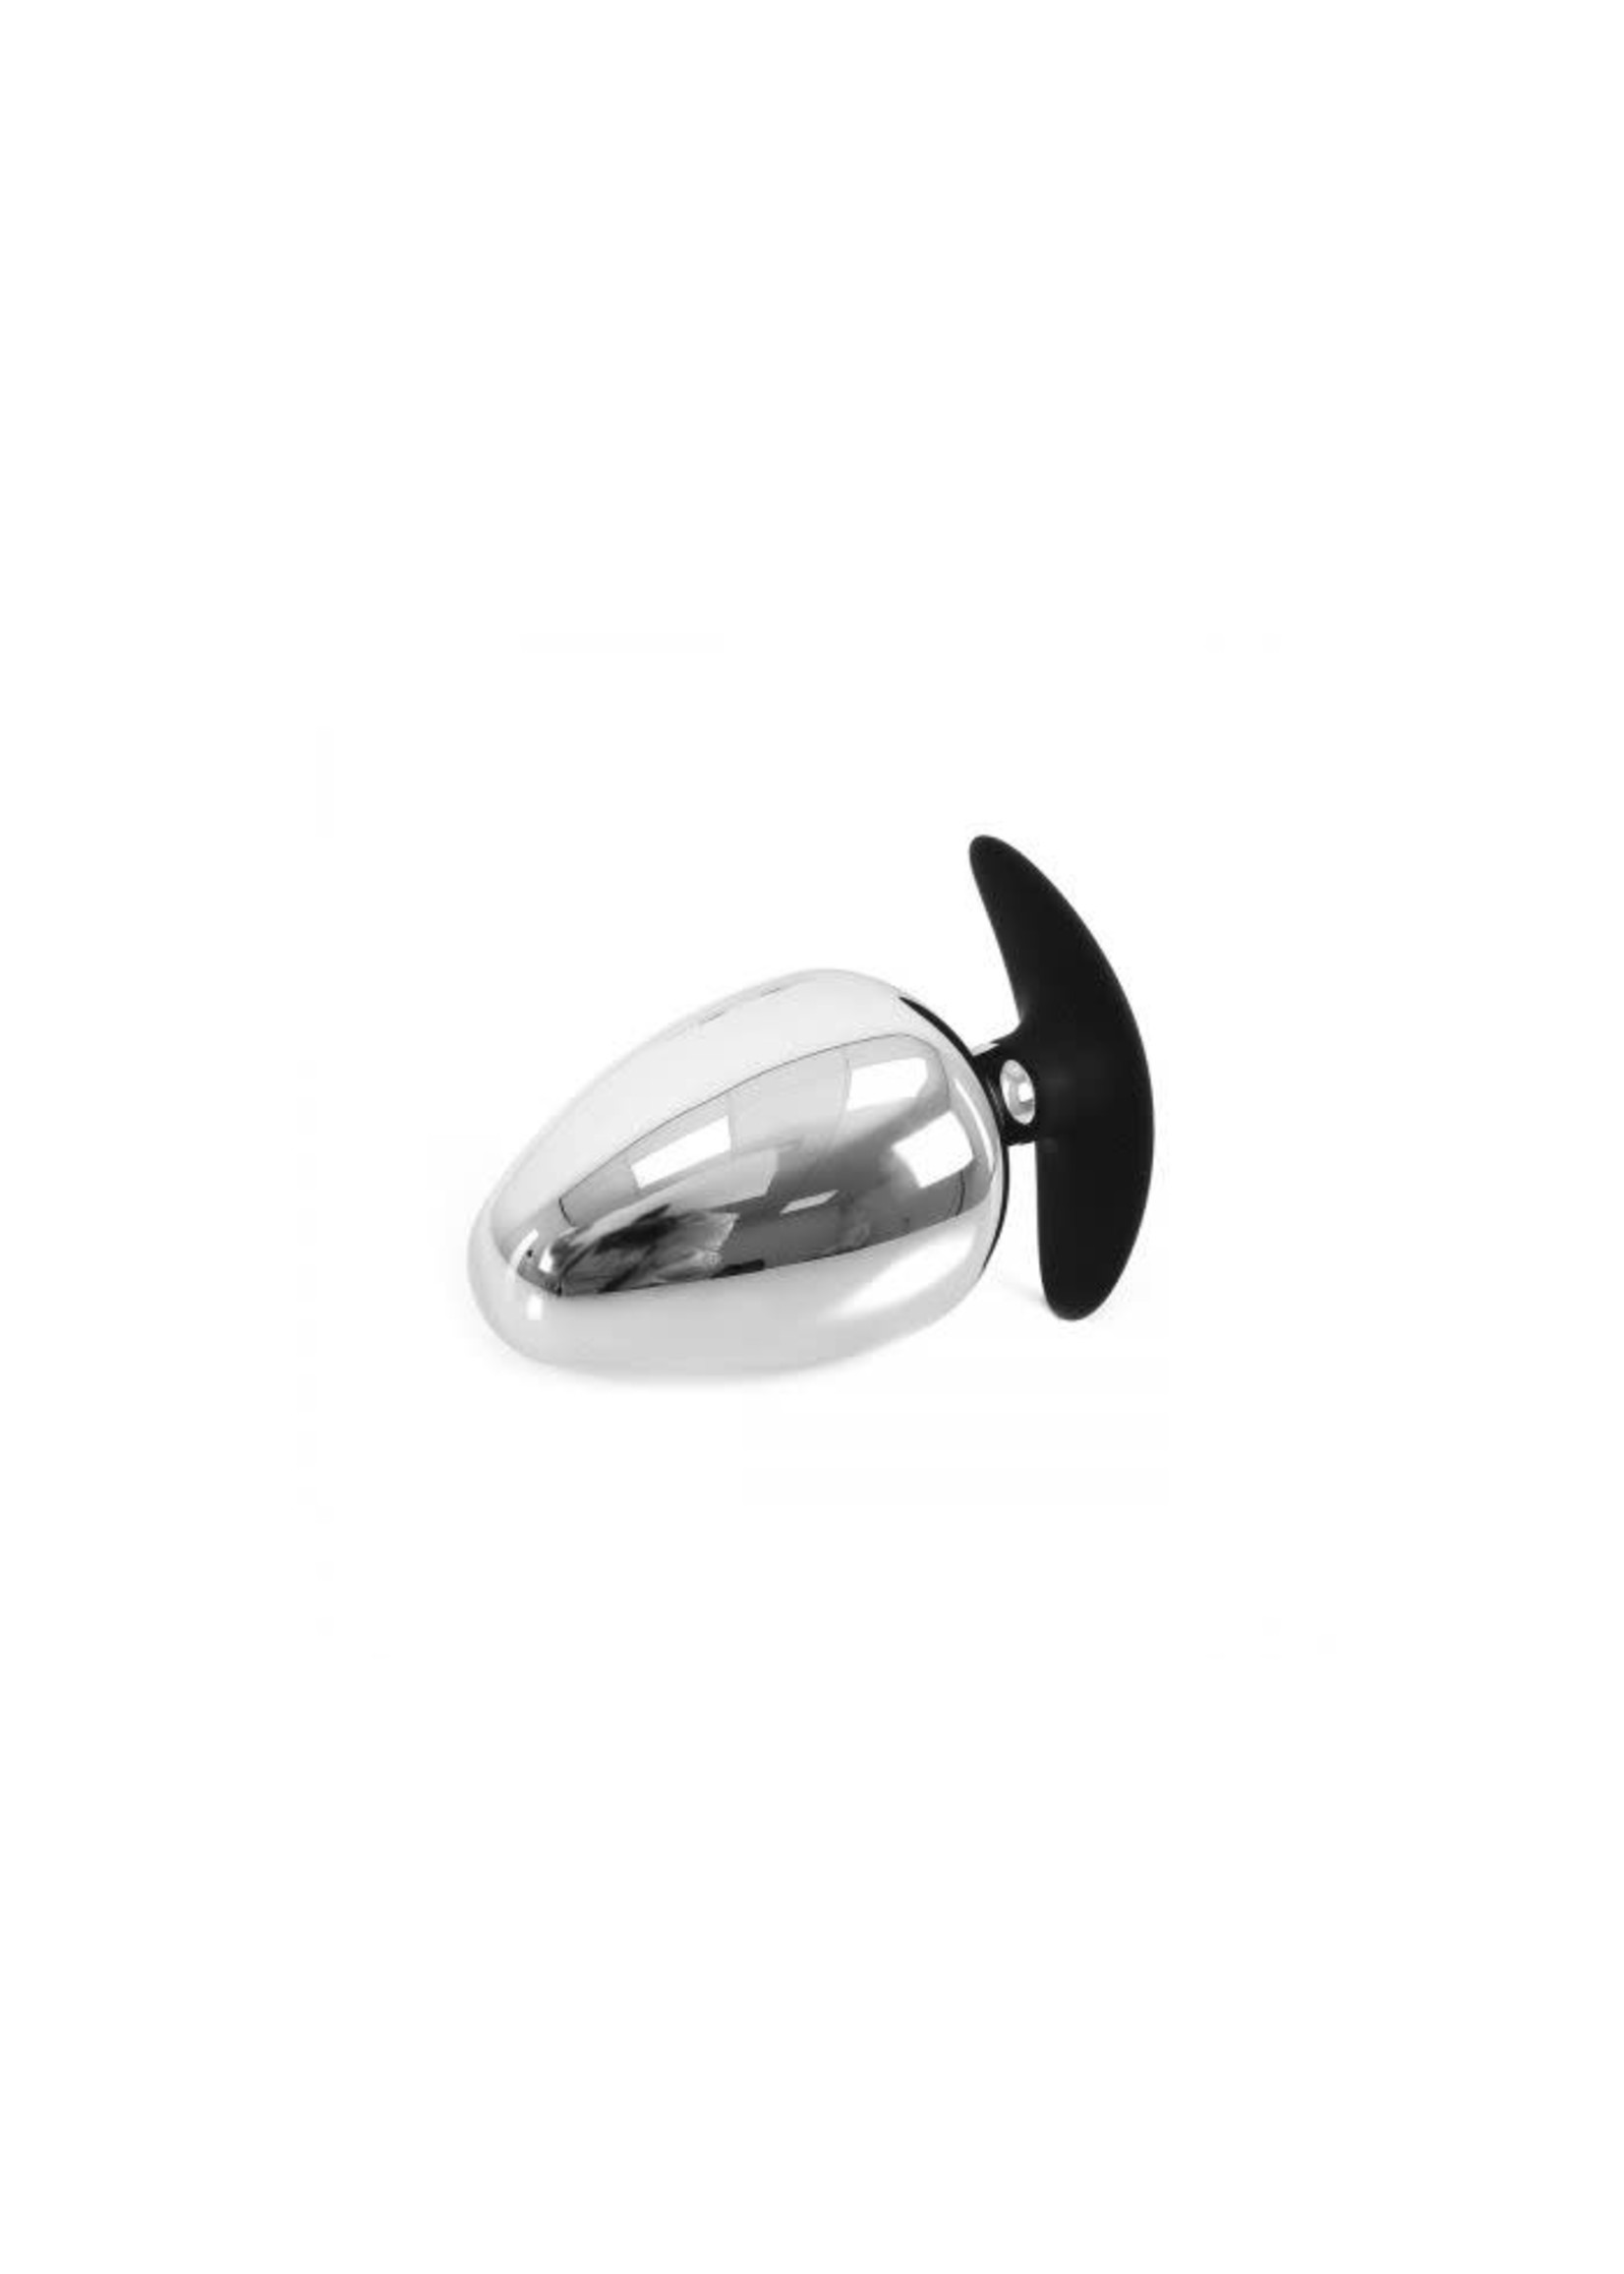 O-Products Buttplug BIG-S 70 mm